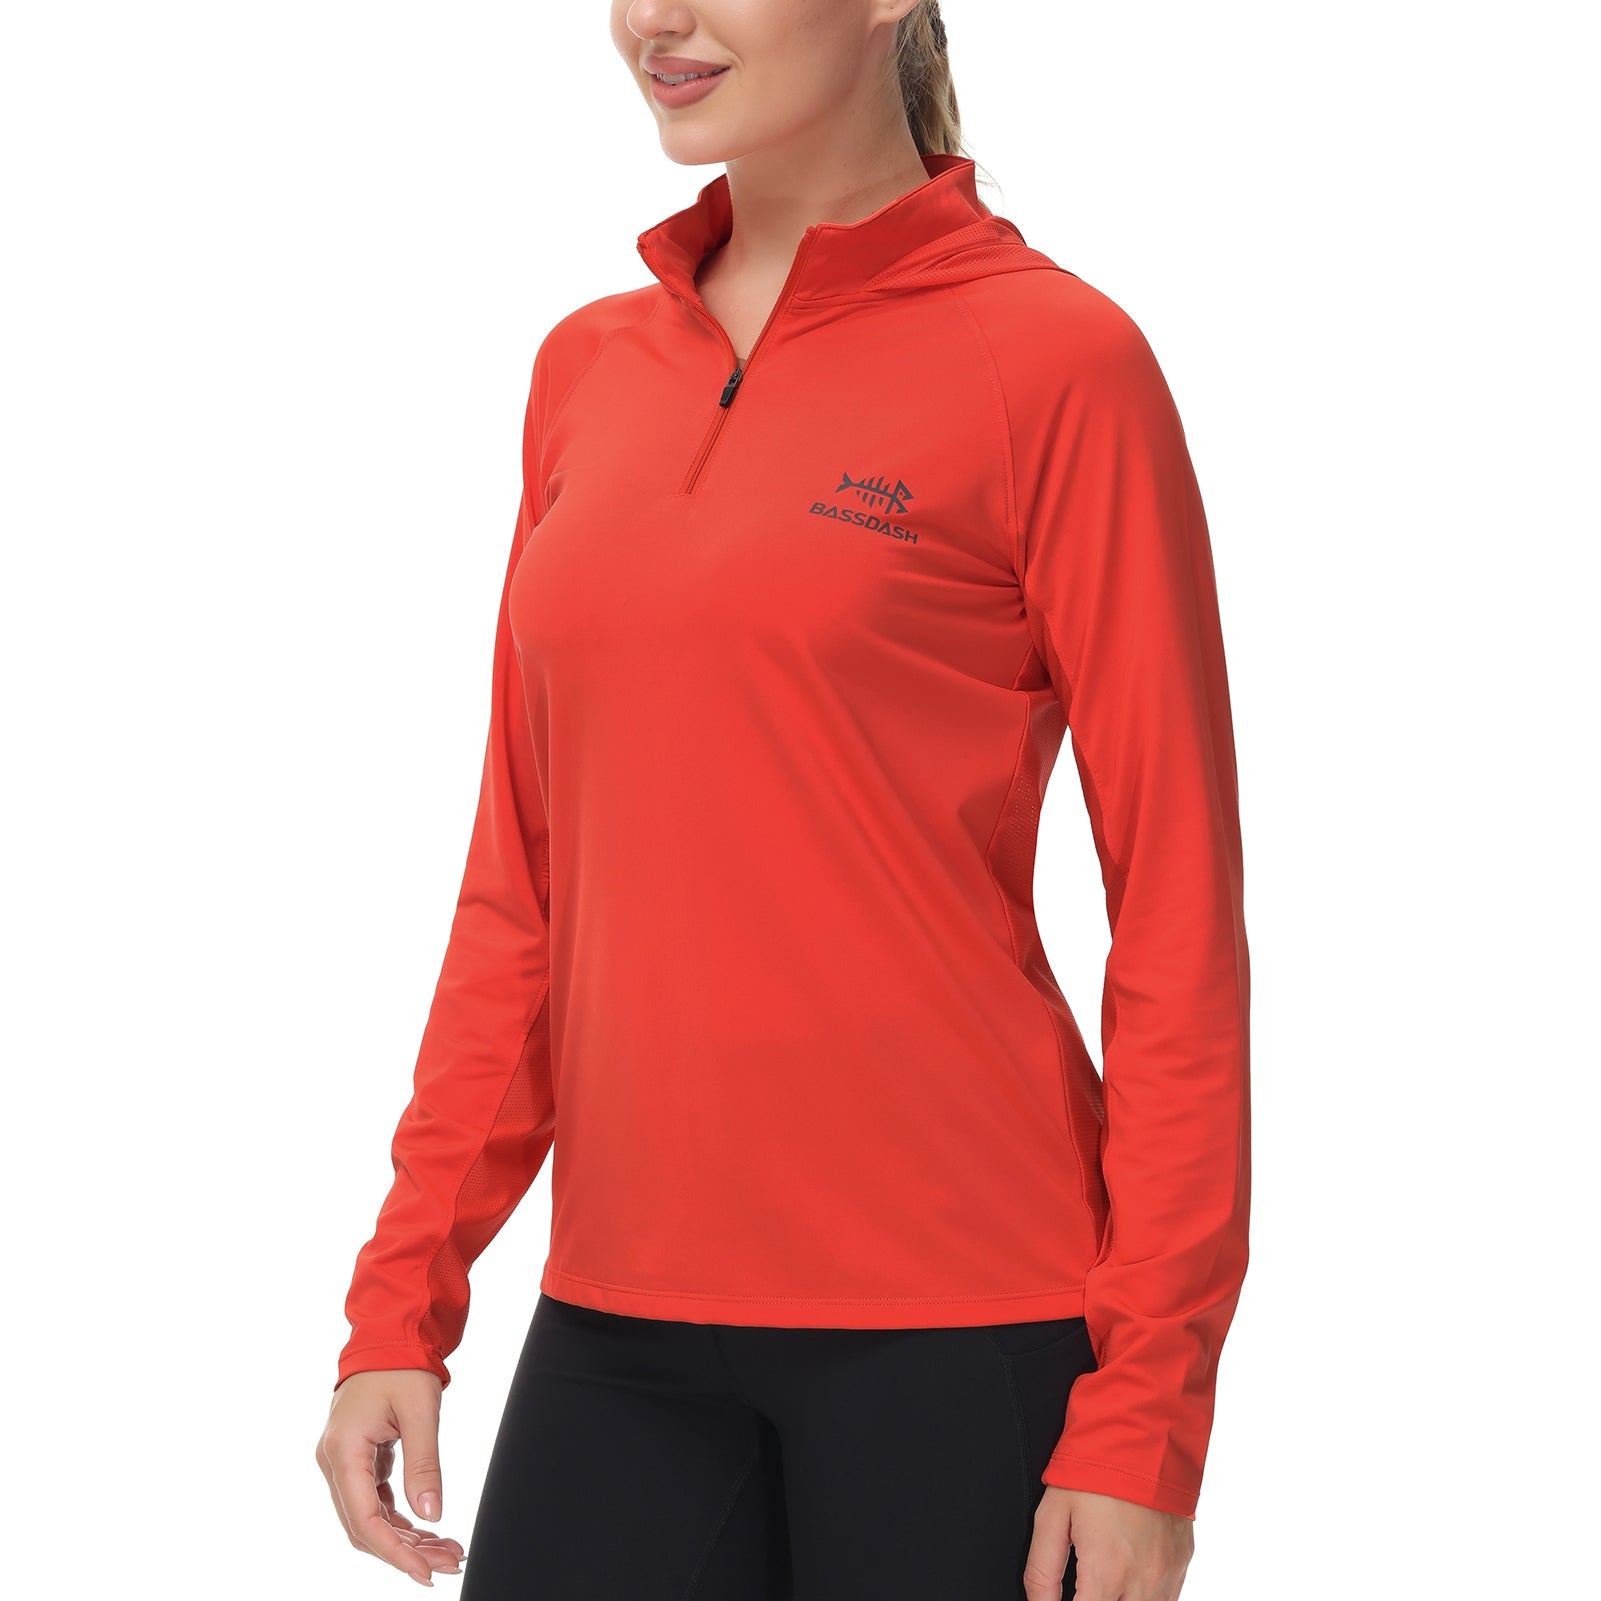 Clothe Co. Quarter Zip Pullover Womens Lightweight Athletic